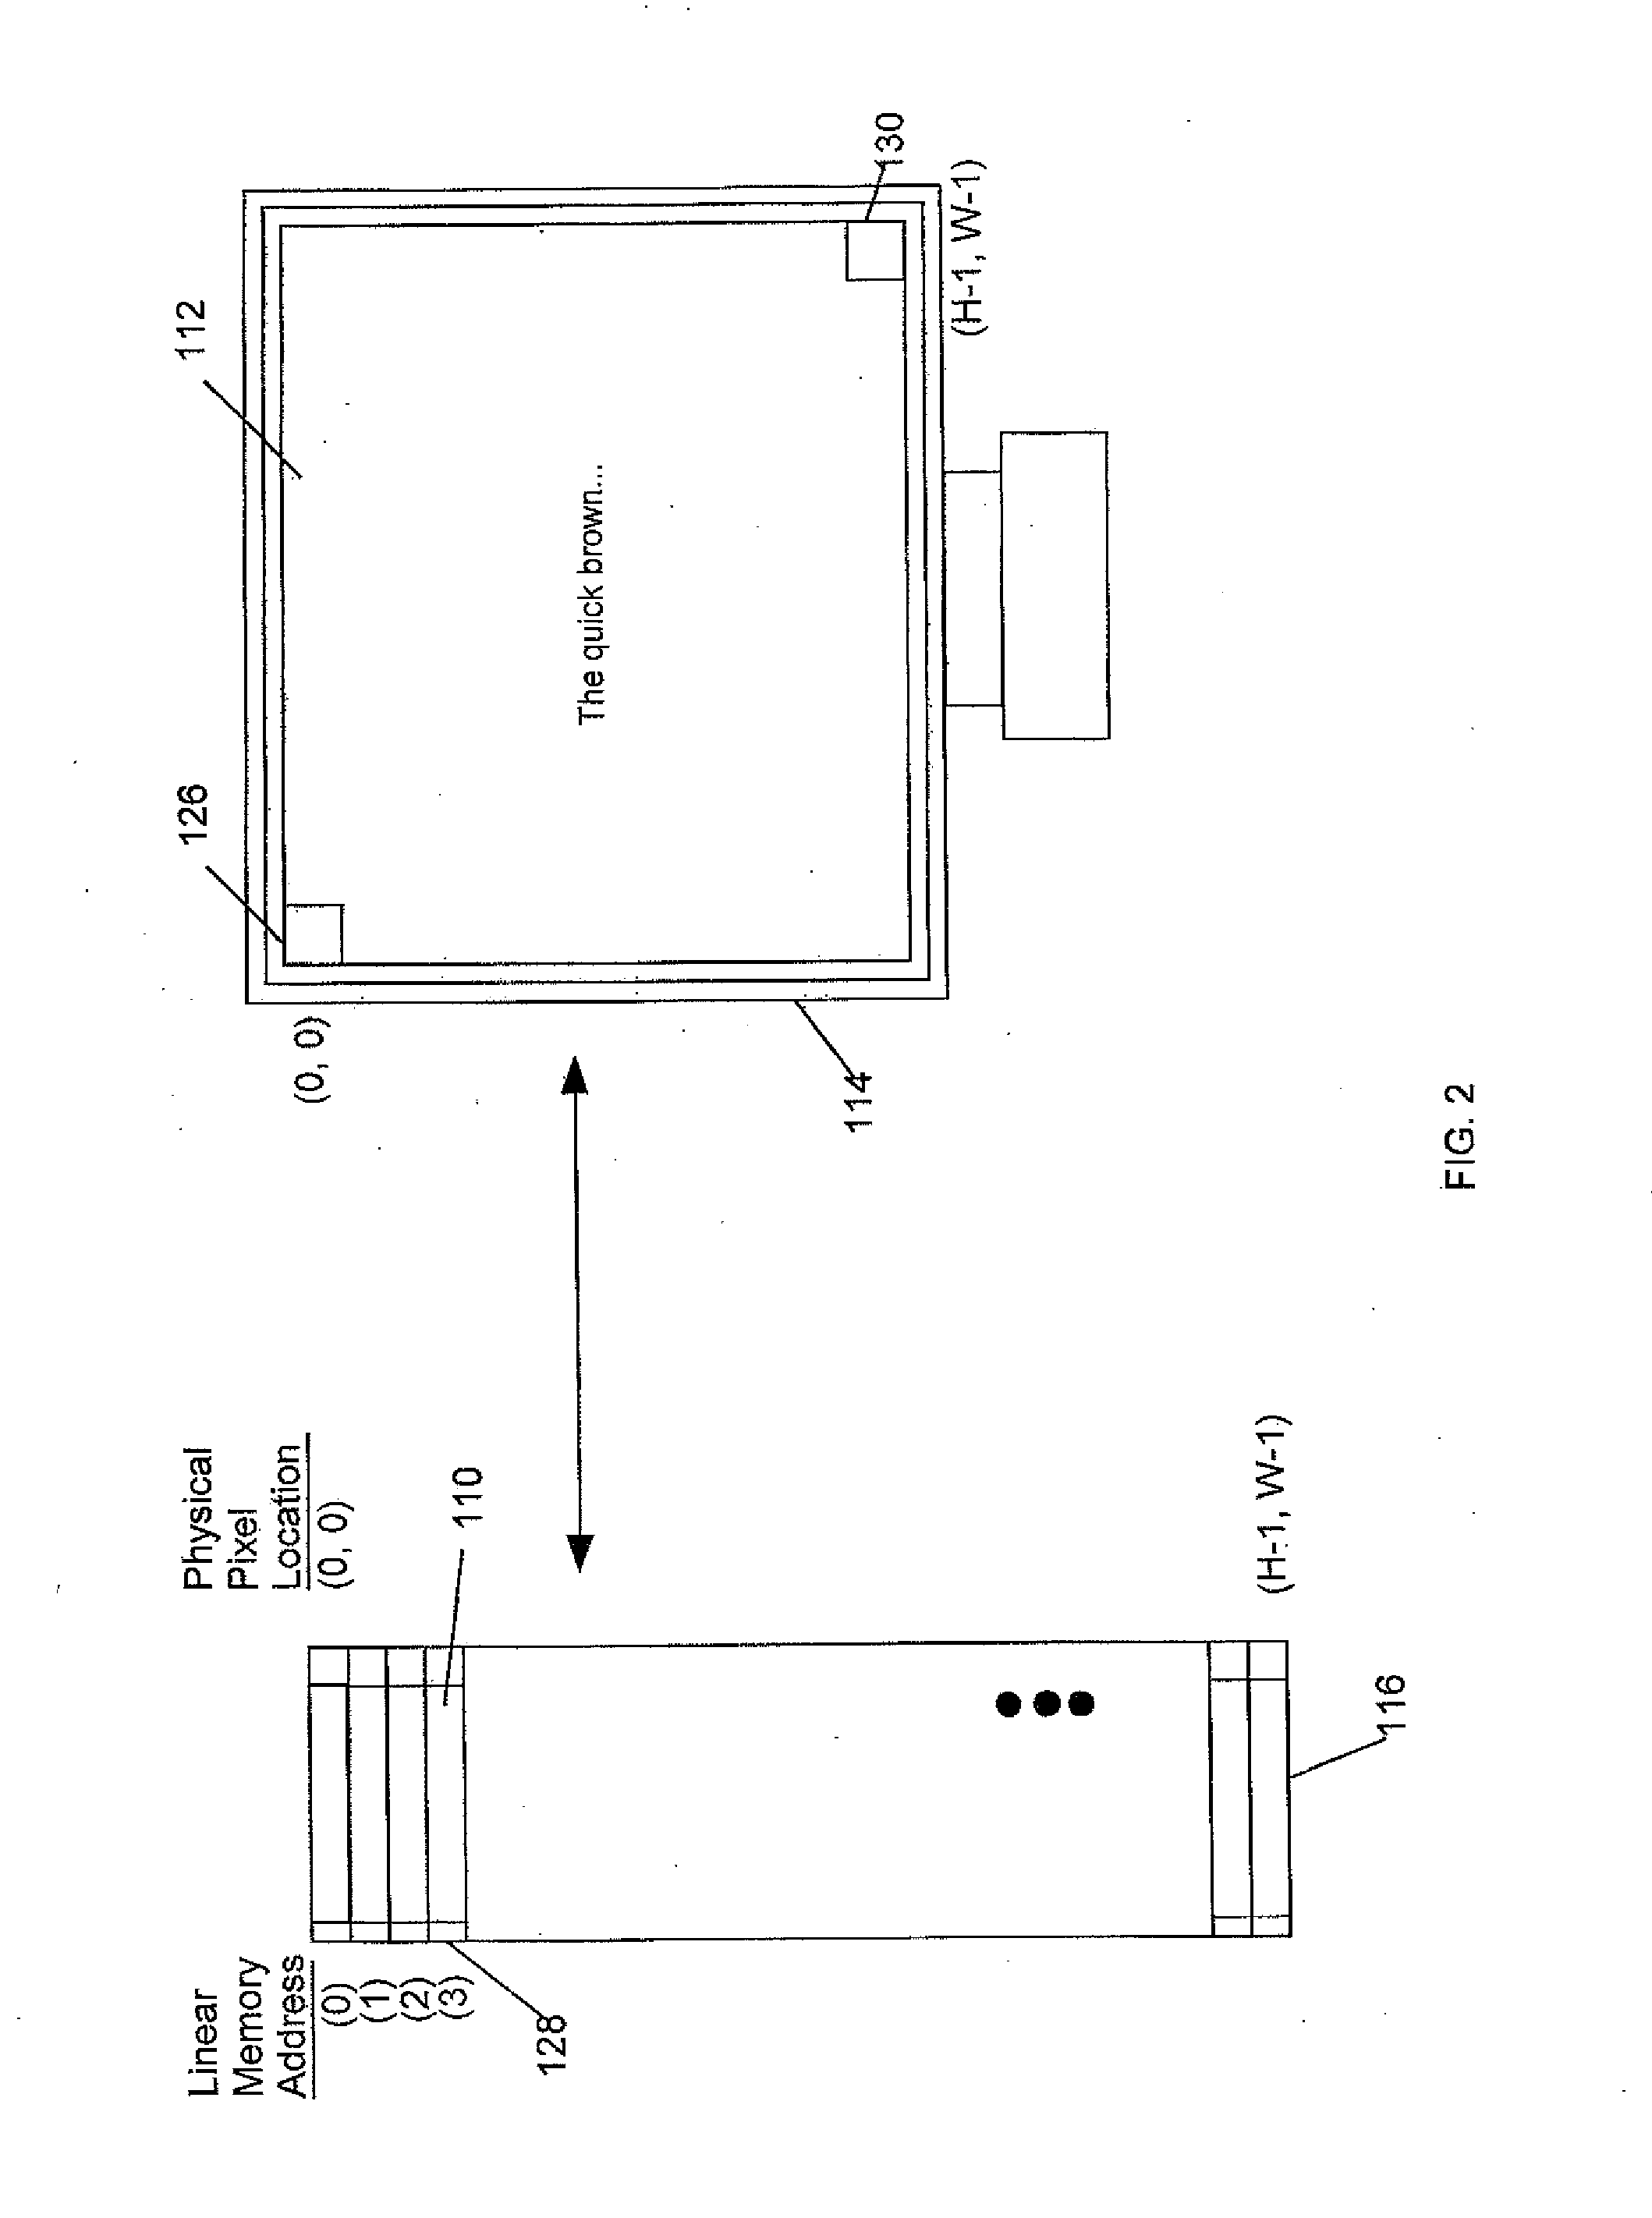 Systems and methods for generating translated display image based on rotation of a display device